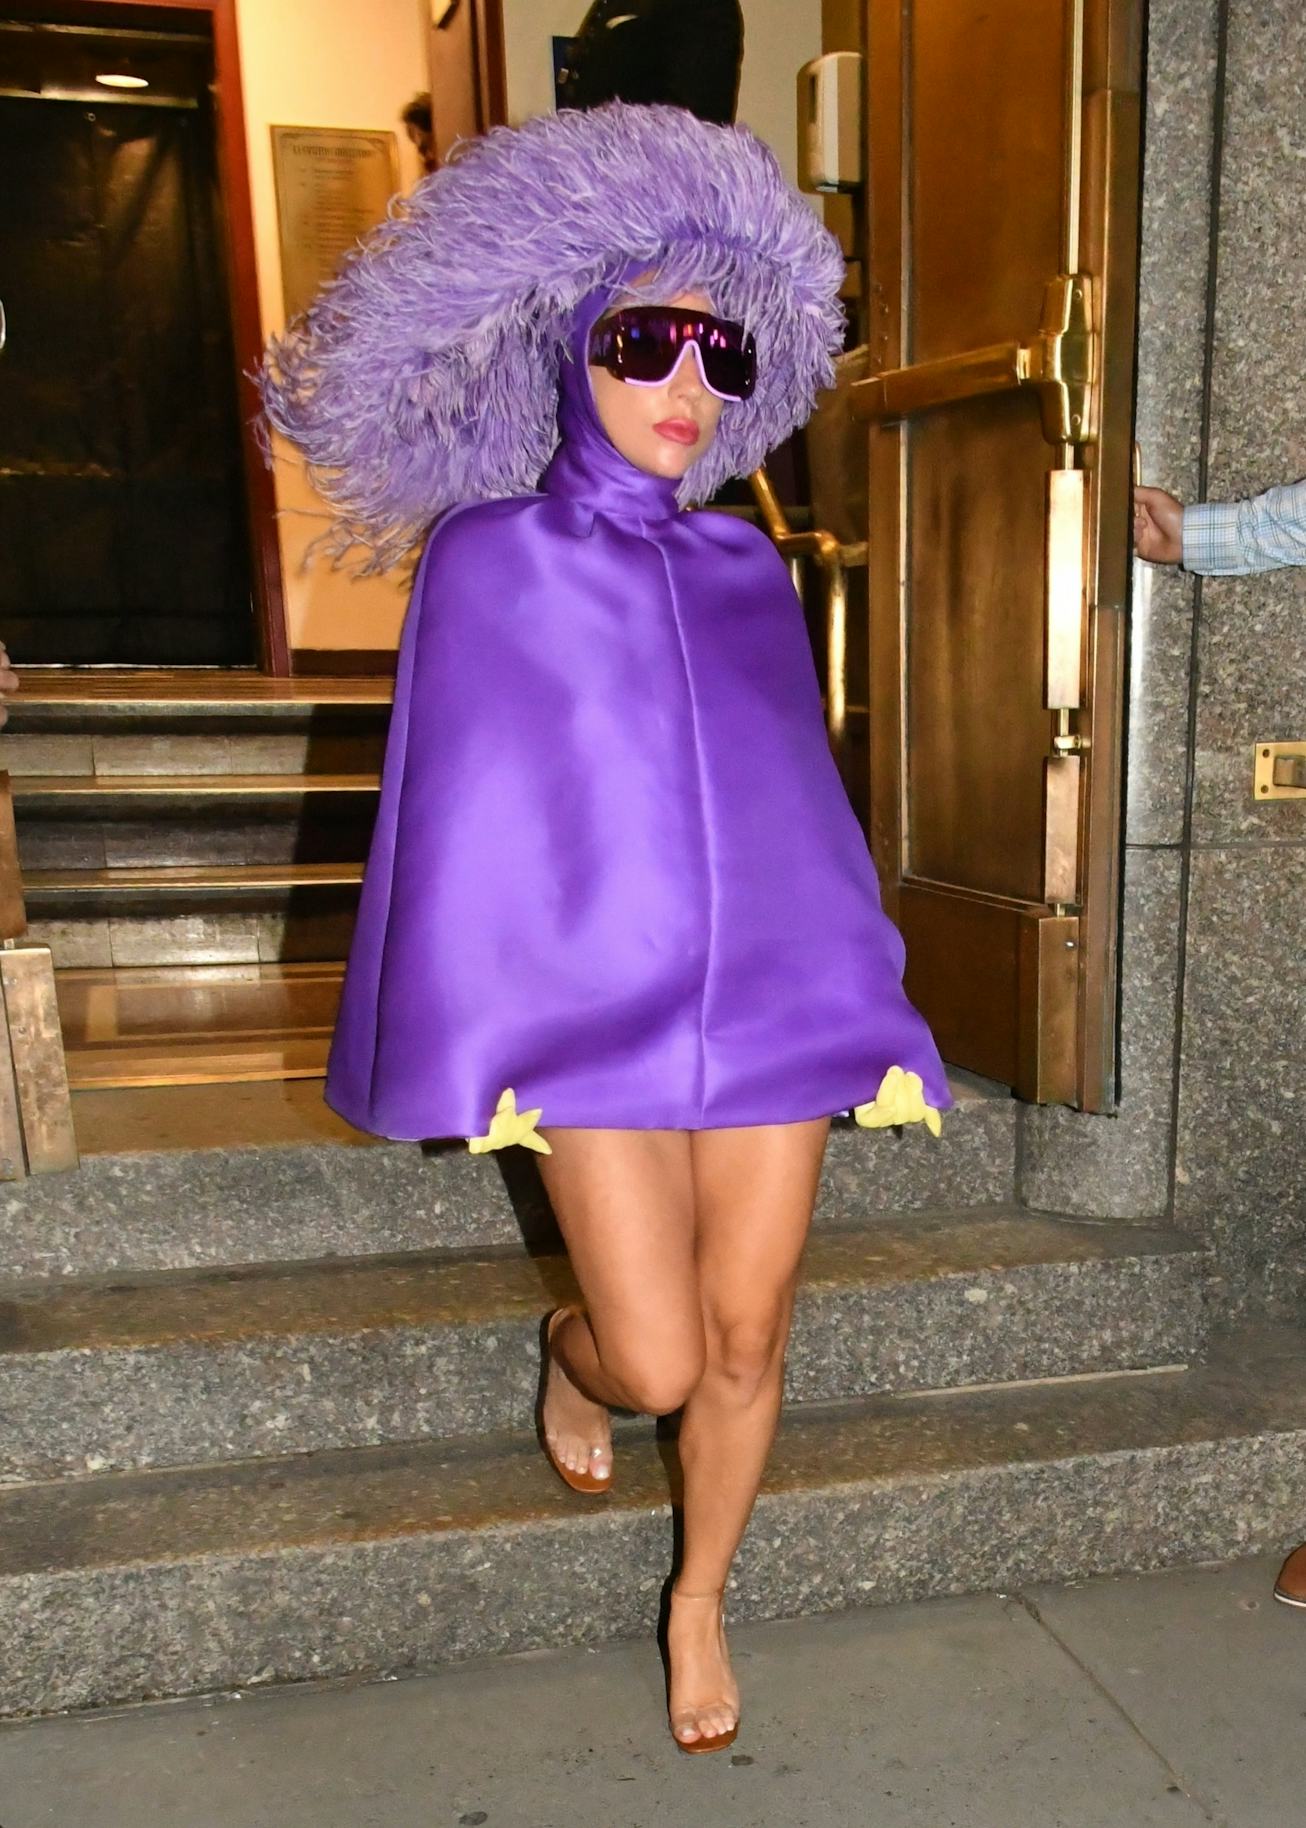 Lady Gaga wears a purple dress and matching headdress for her departure from Radio City Music Hall i...